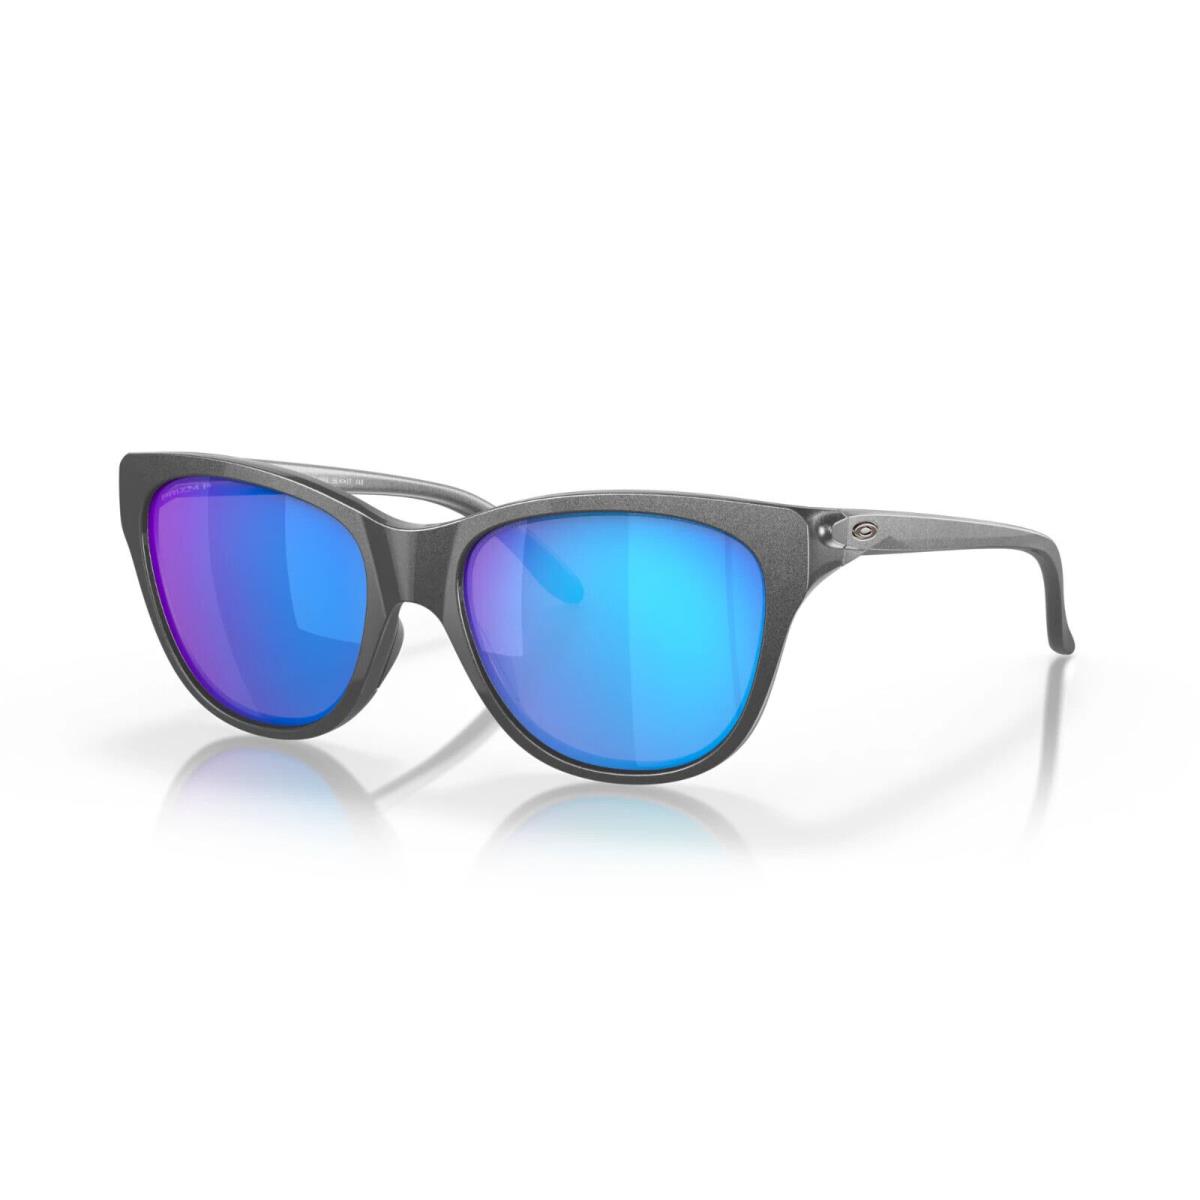 Oakley Hold Out OO9357-0255 Steel Frame Sapphire Iridium Polarized - Steel Frame, Sapphire Iridium Lens